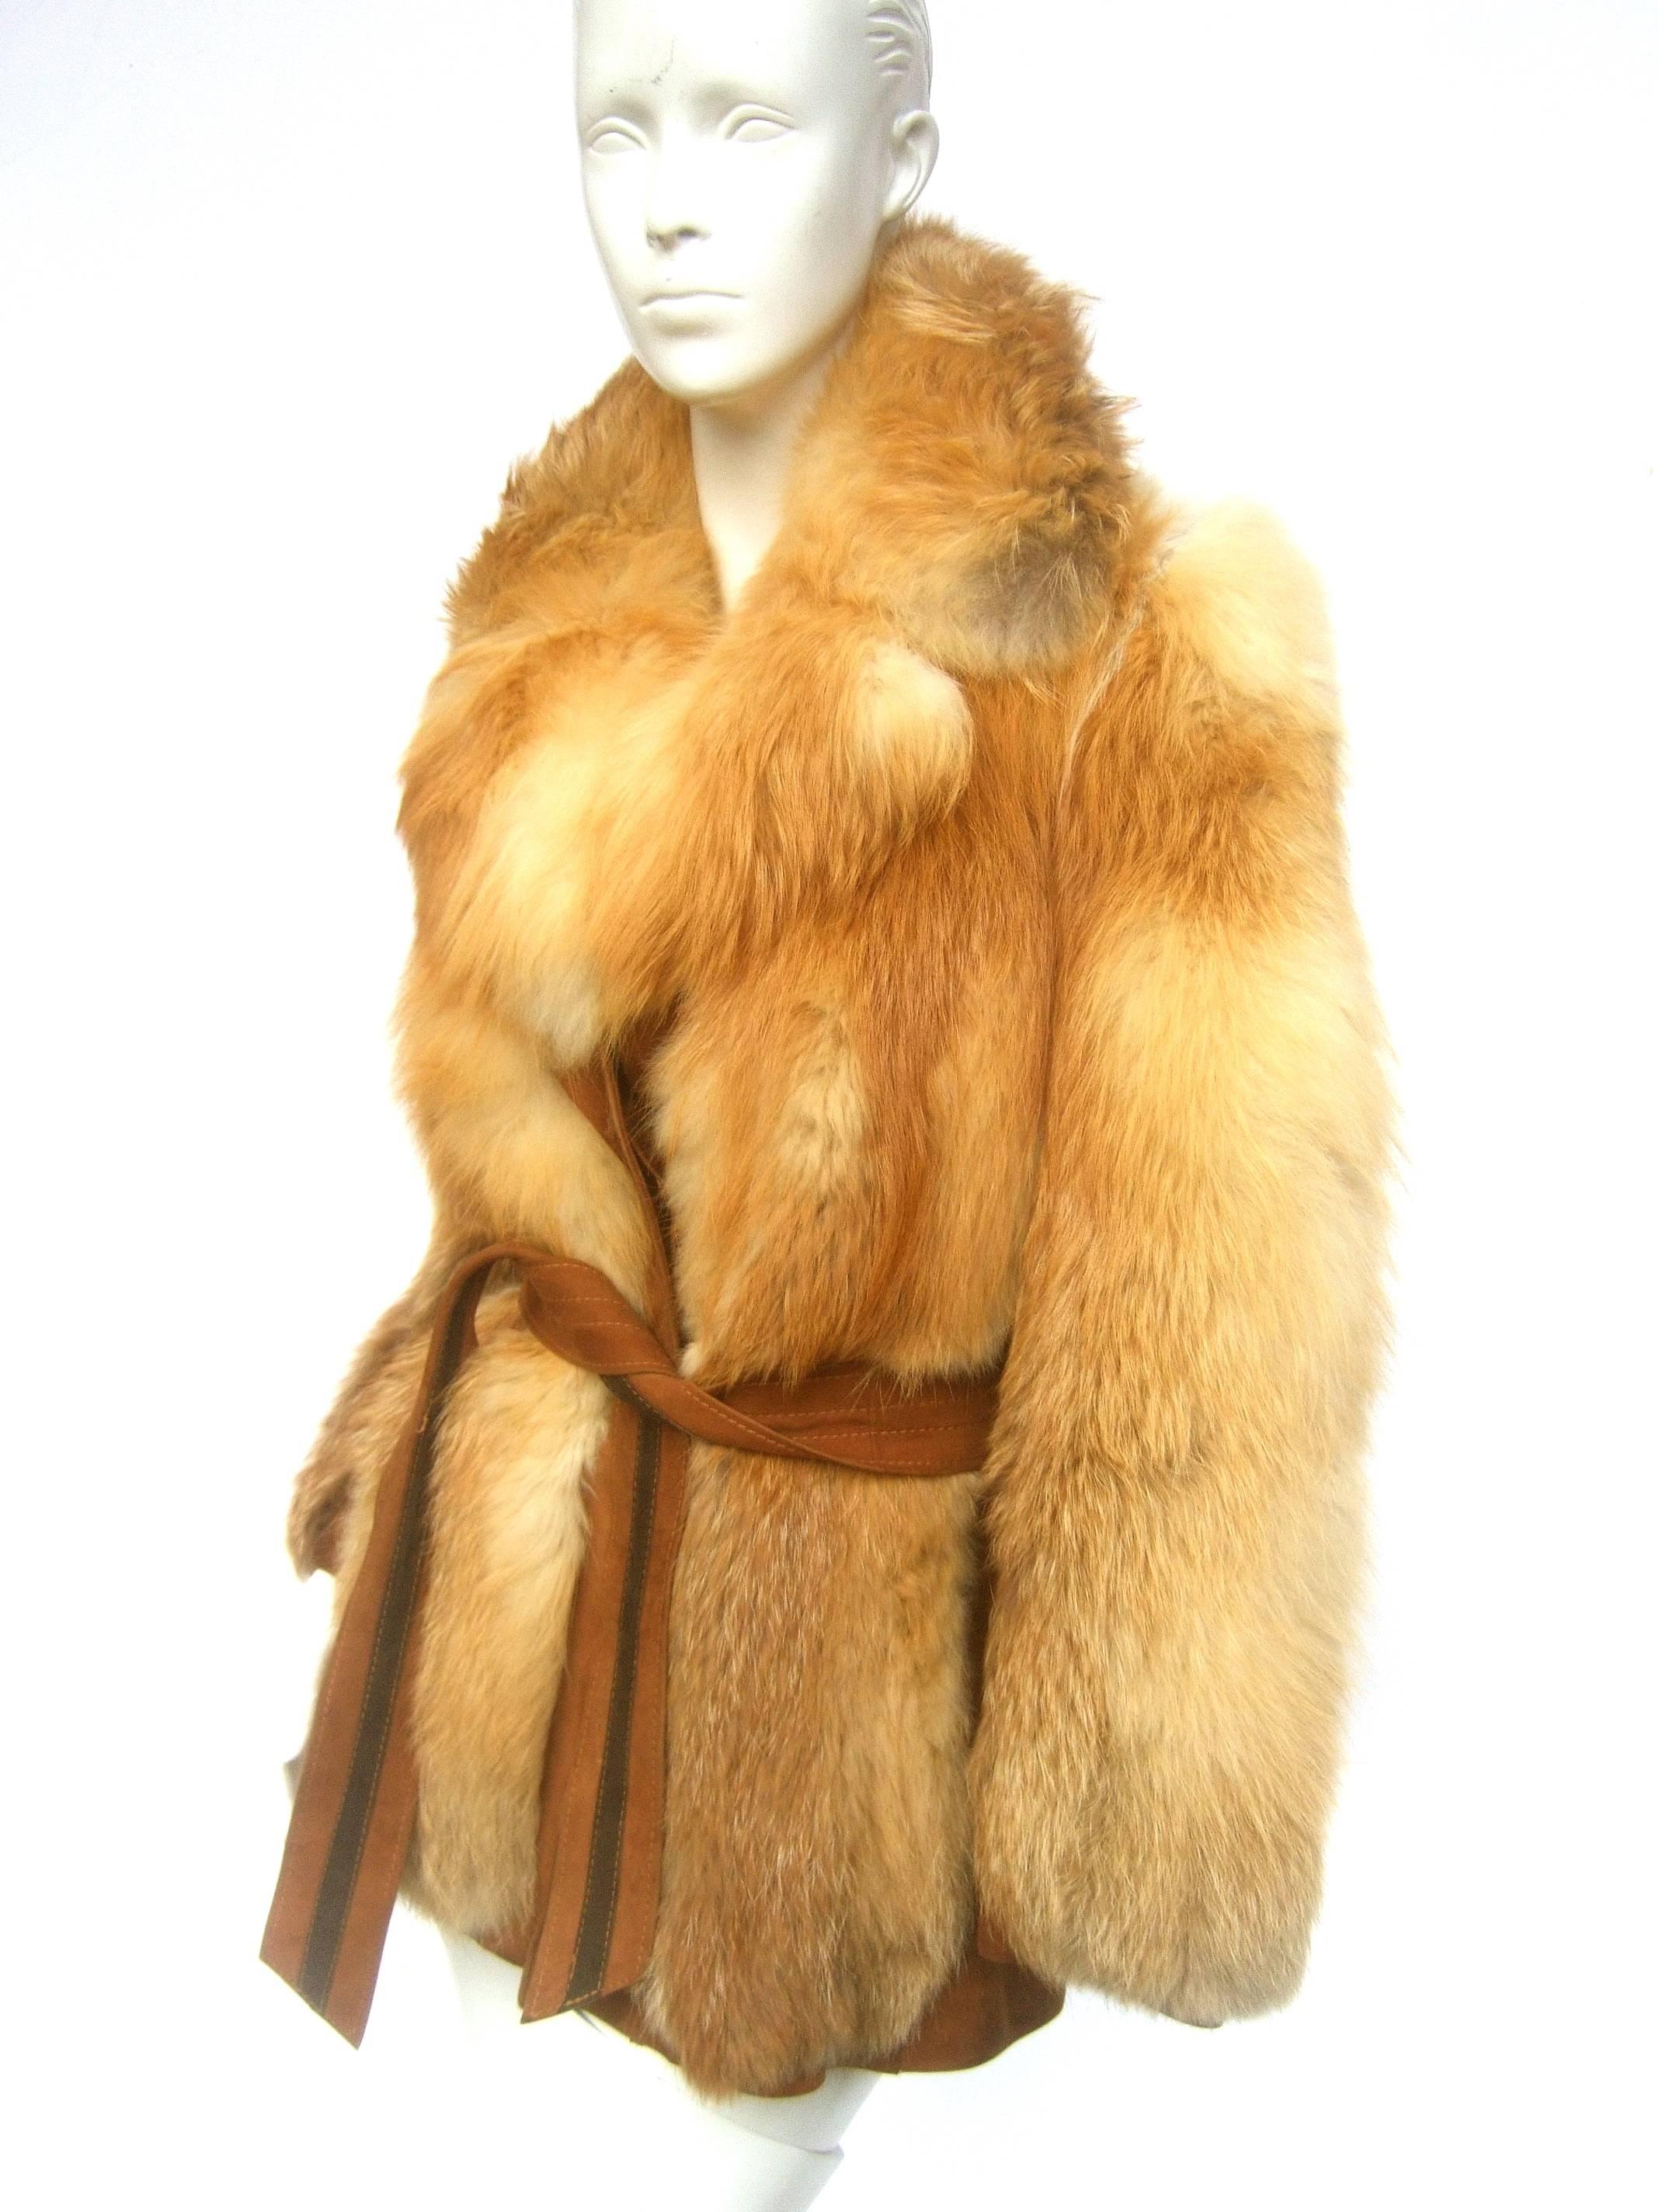 Revillon Paris plush fox fur belted jacket ca 1970
The fluffy dyed fox fur has a rust brown hue 
Designed with a dramatic voluminous collar 

The belt, sleeves and sides are juxtaposed
with soft light brown suede panels and cinched
belt tie. The